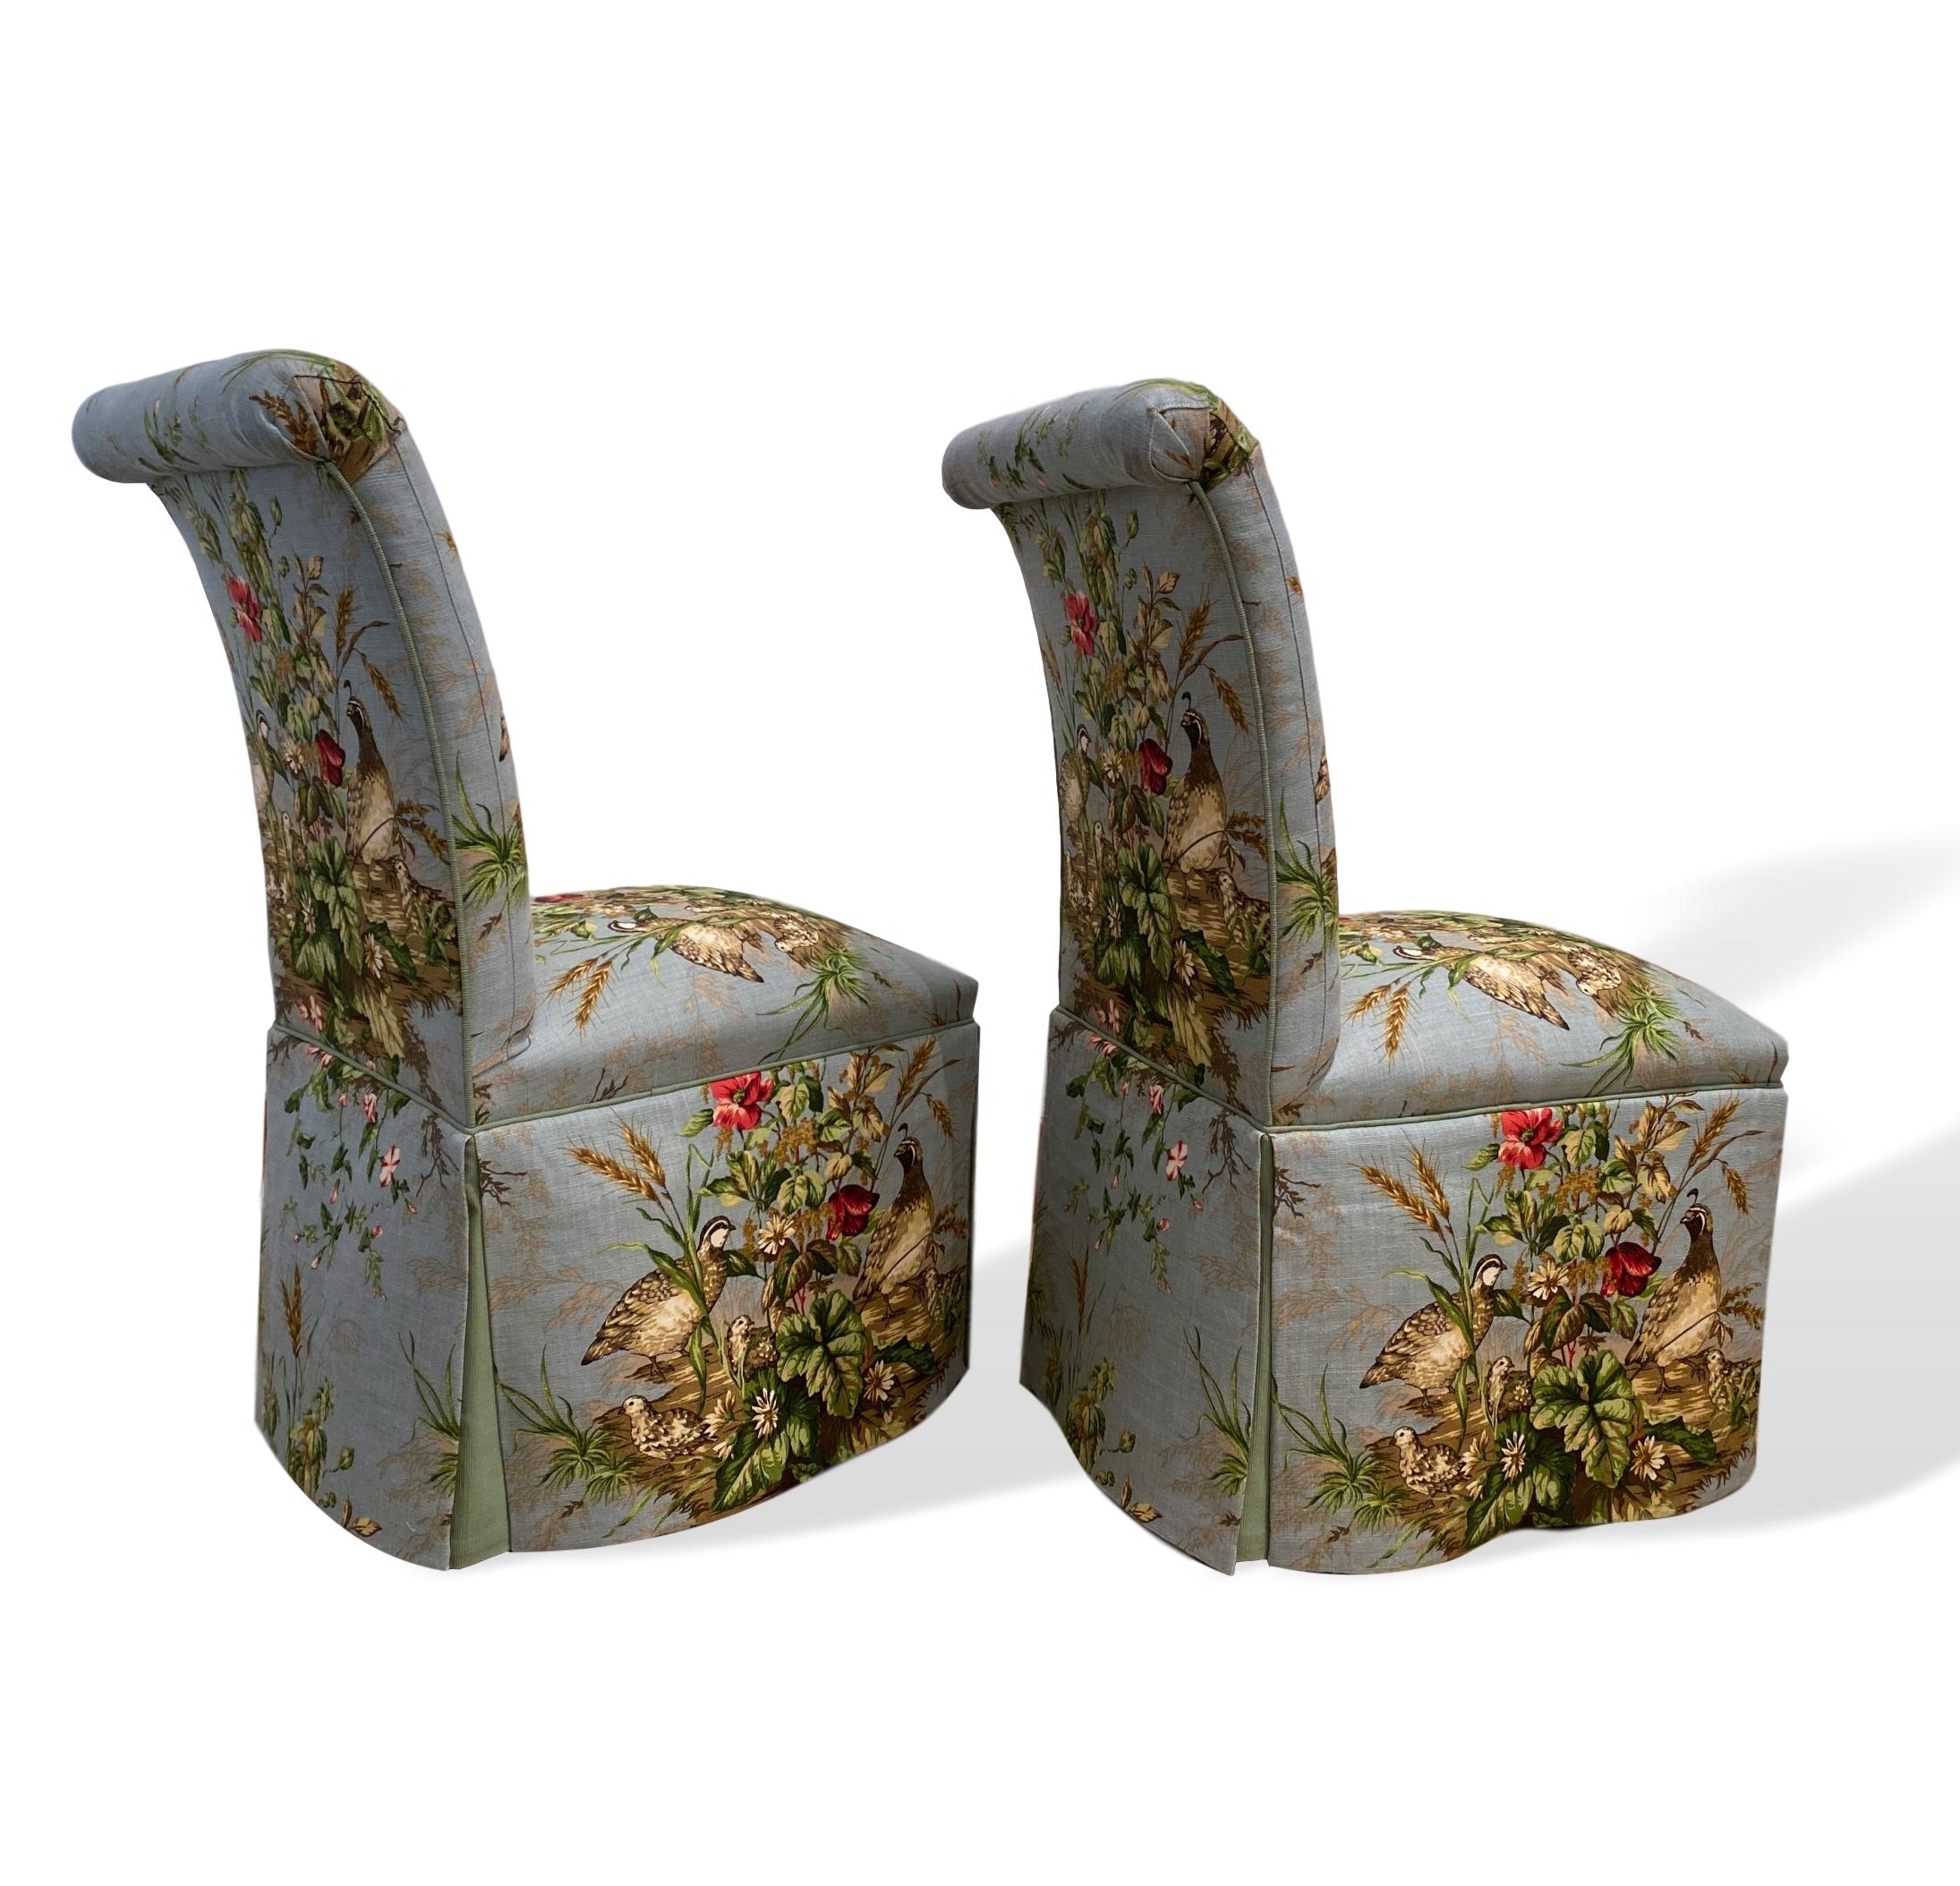 Hand-Crafted Pair of Parsons Chairs in Scalamandré Iconic Fabric 'Edwin's Covey' Brand-New